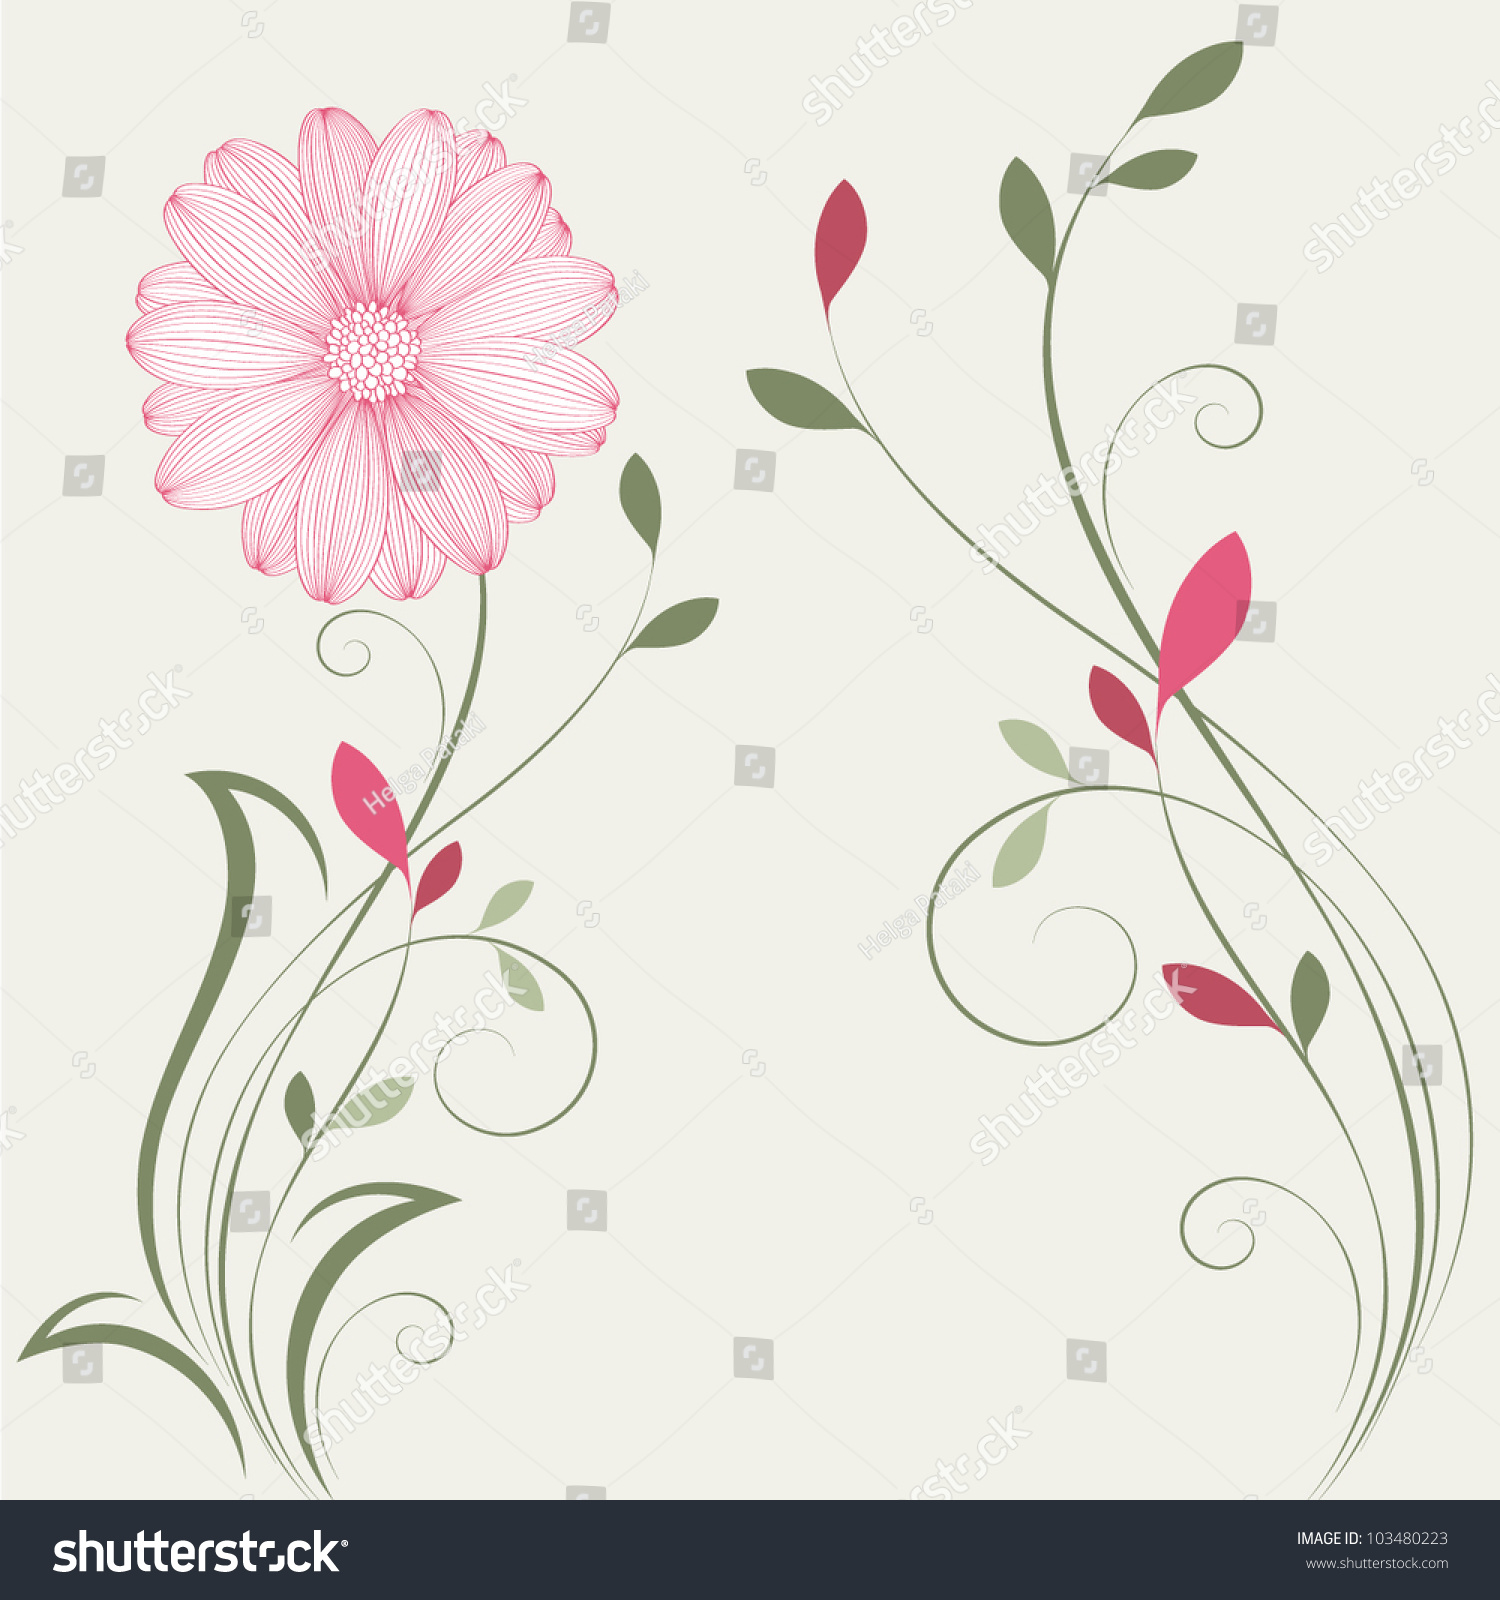 Handdrawing Floral Background Flower Chamomile Element Stock Vector